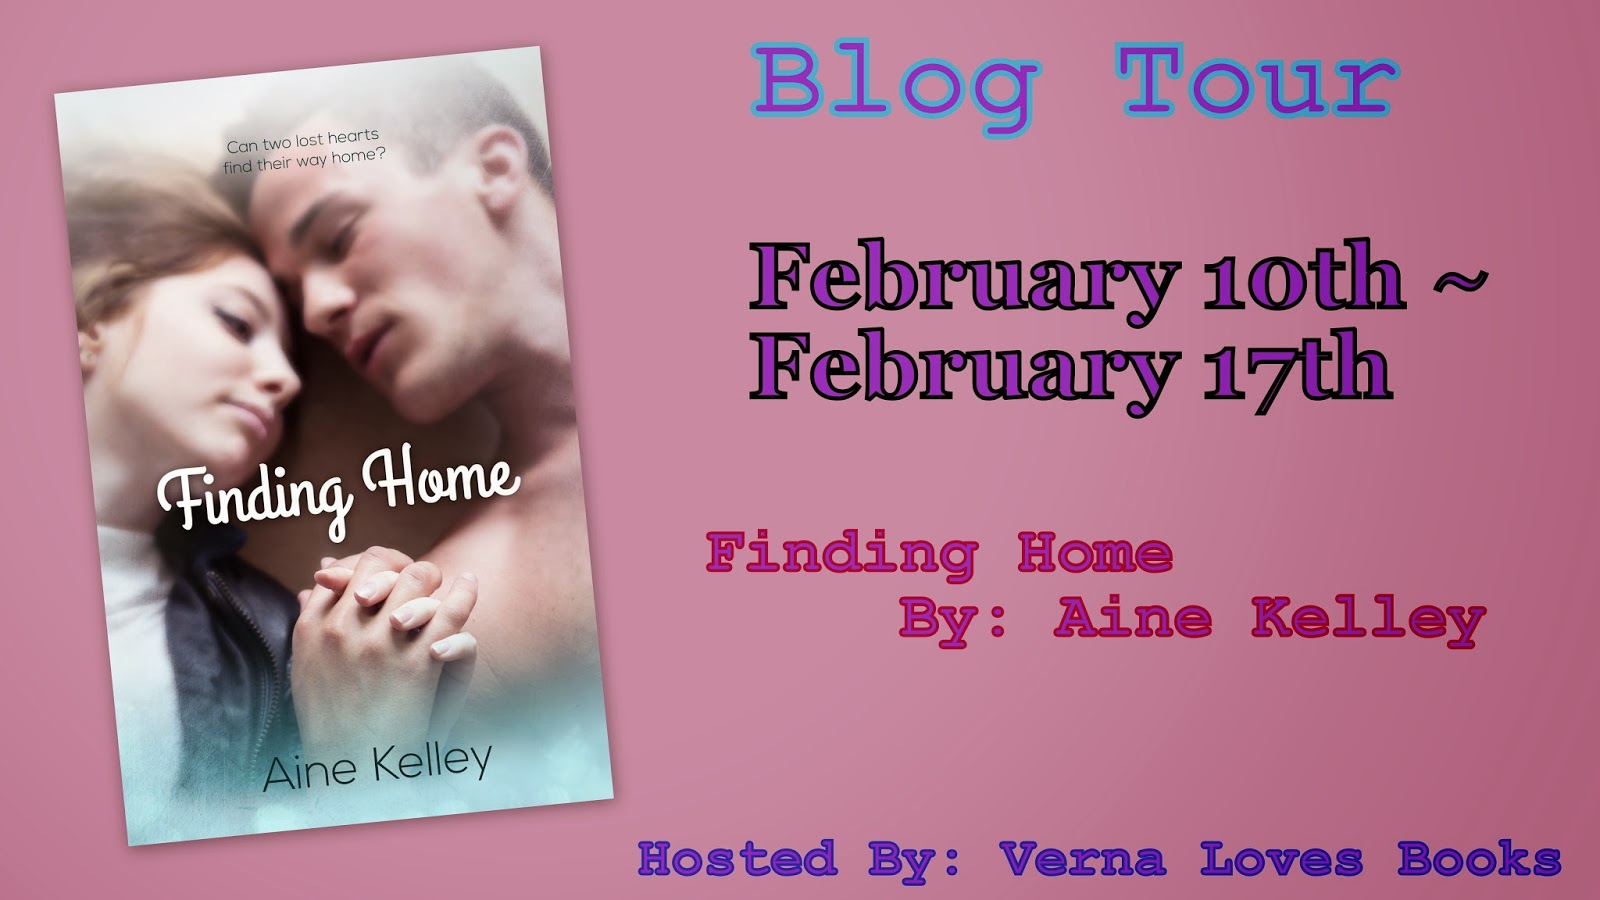 Finding Home by Aine Kelley